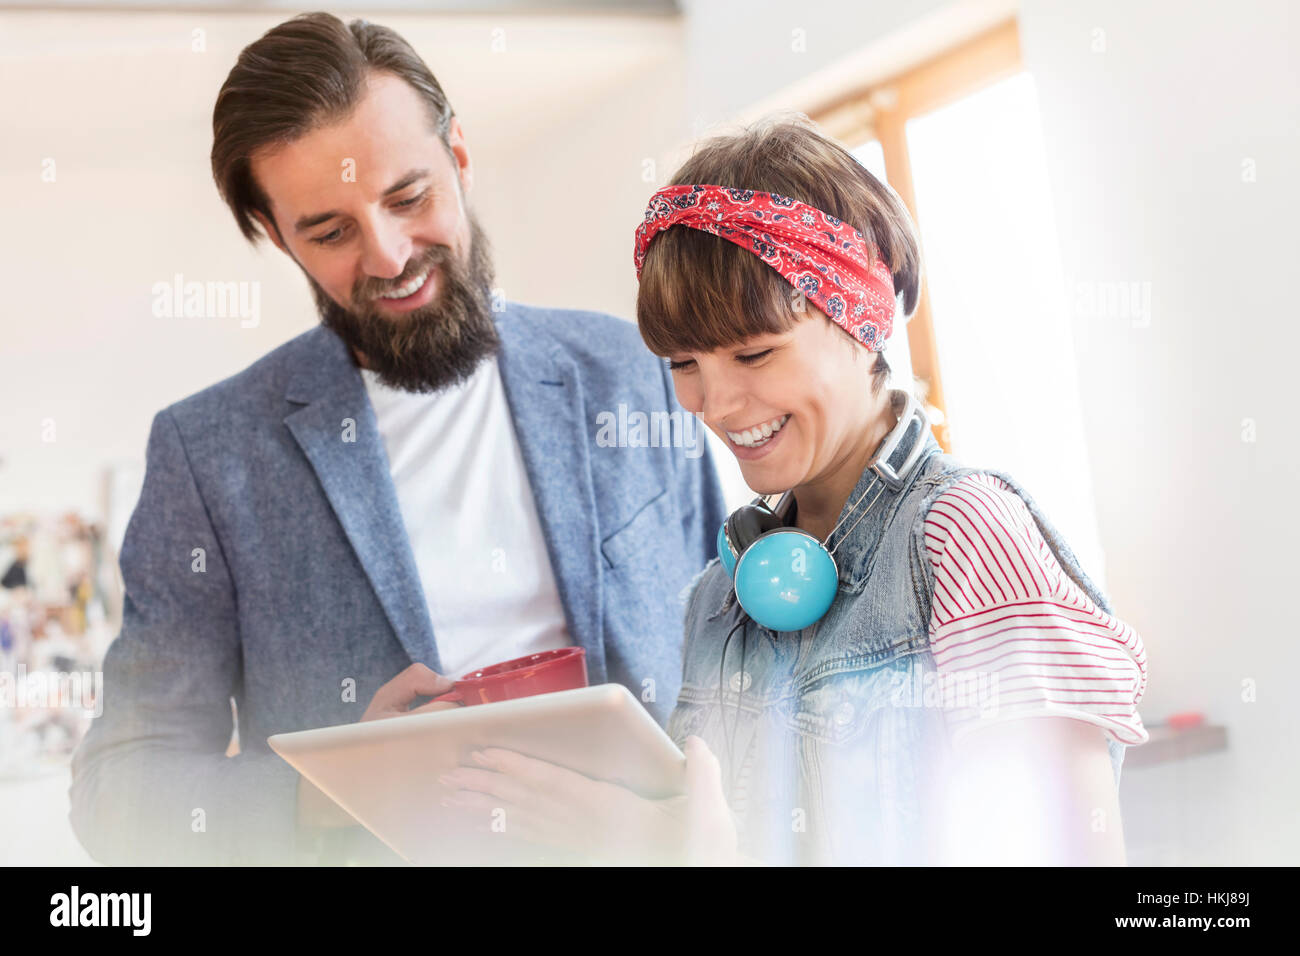 Smiling design professionals using digital tablet in office Stock Photo